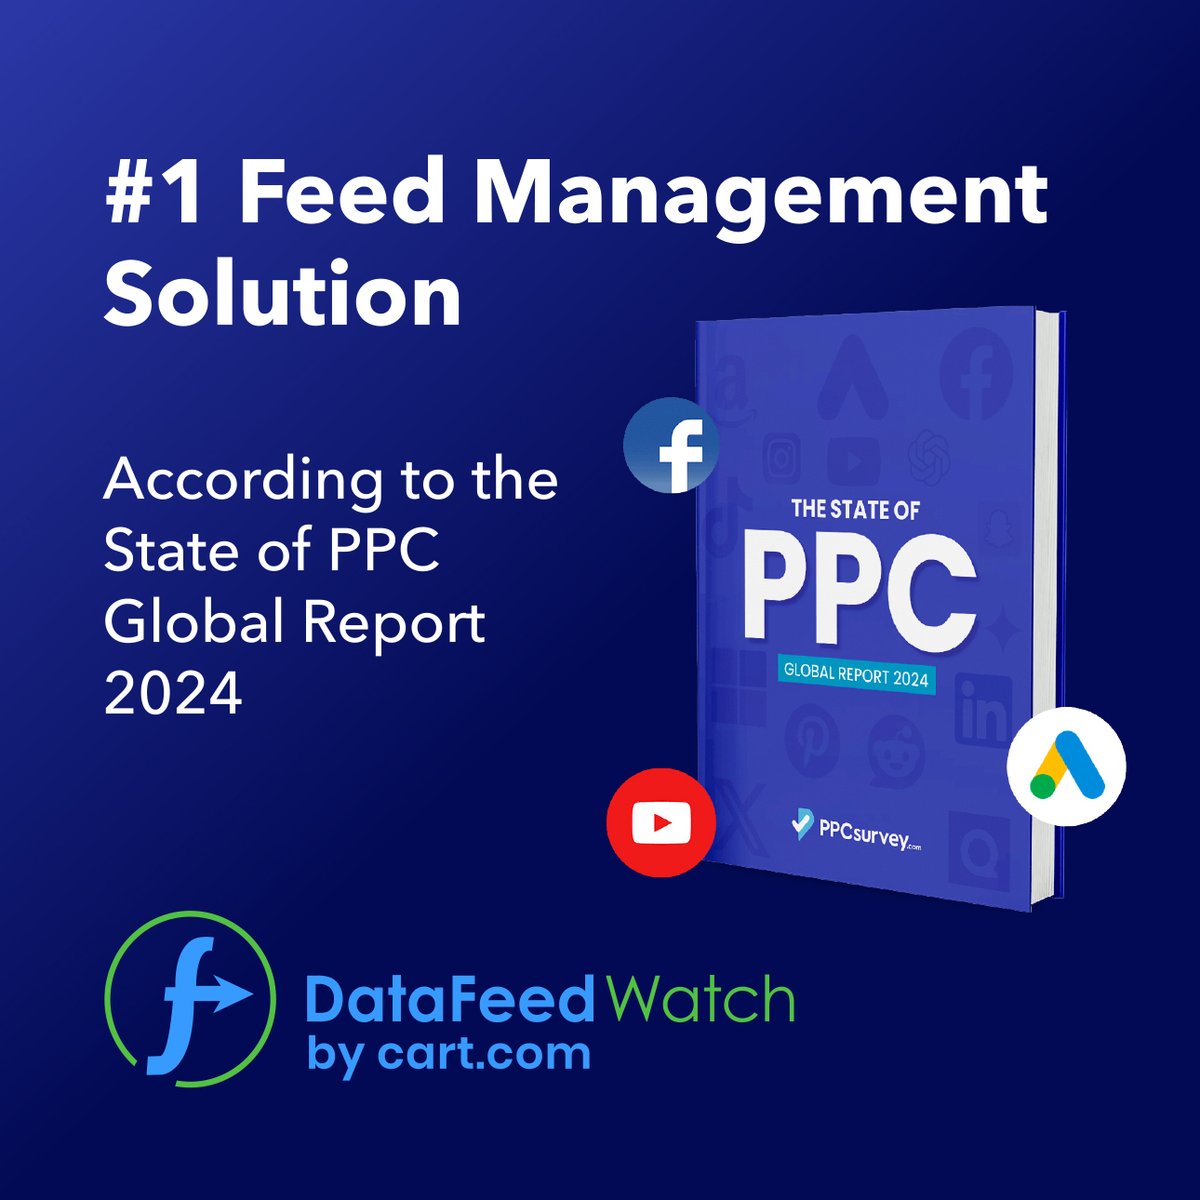 DataFeedWatch by Cart.com was voted the #1 Feed Management Solution in the State of PPC Global Report! 🌐 Huge thank you to everyone who participated and to all of our customers for trusting us with their feeds.🤝 #ppc #ppcsurvey #feedmanagement #PPCGlobalReport